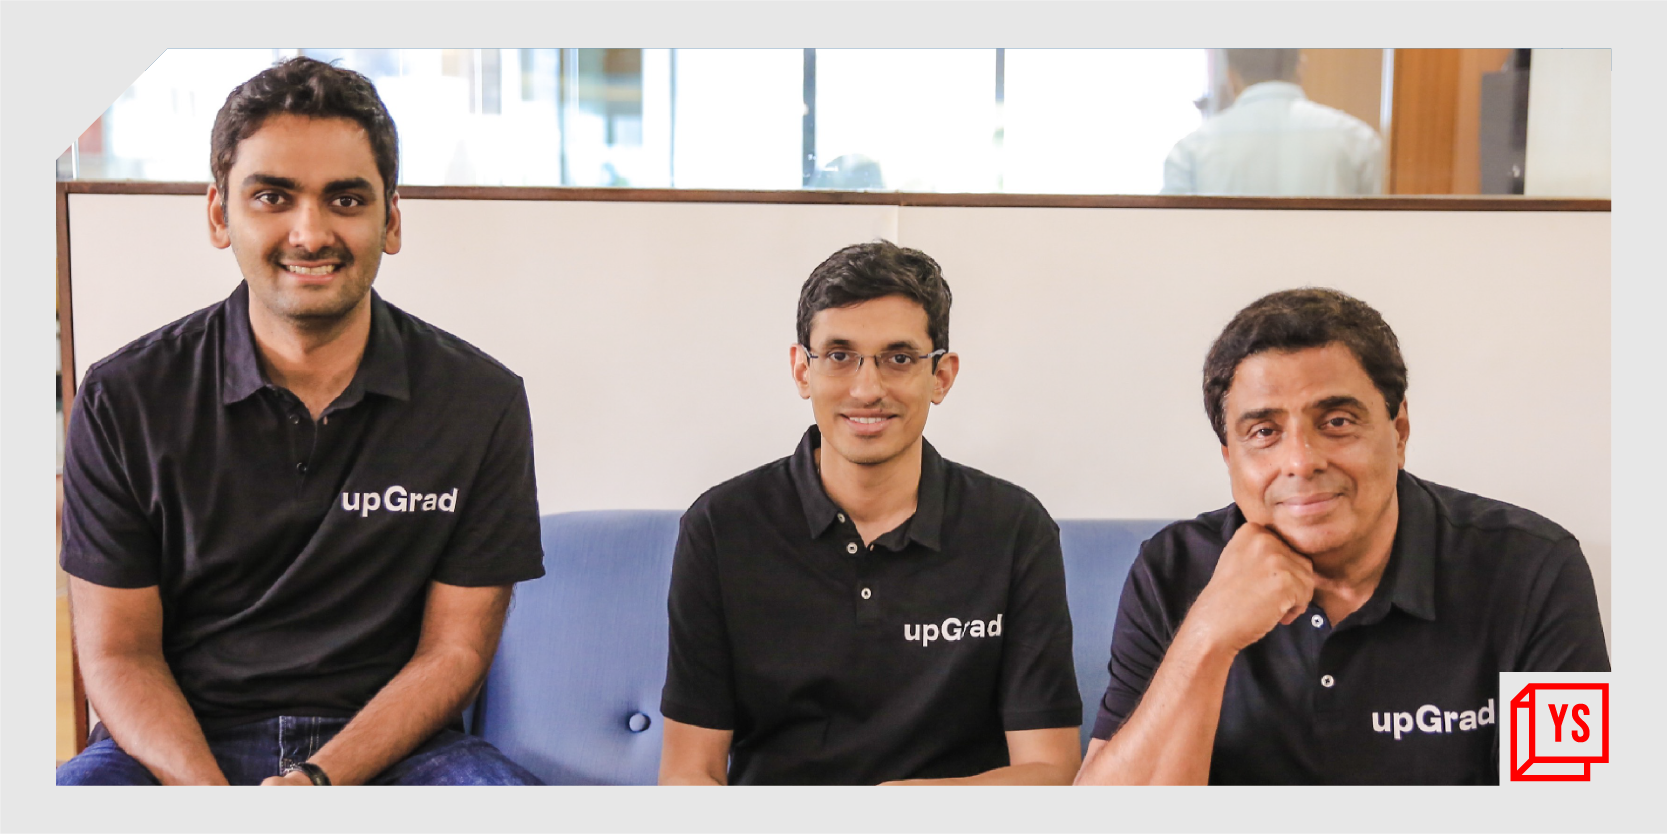 upGrad to hire 3,000 people in 3 months, close to securing fresh funding